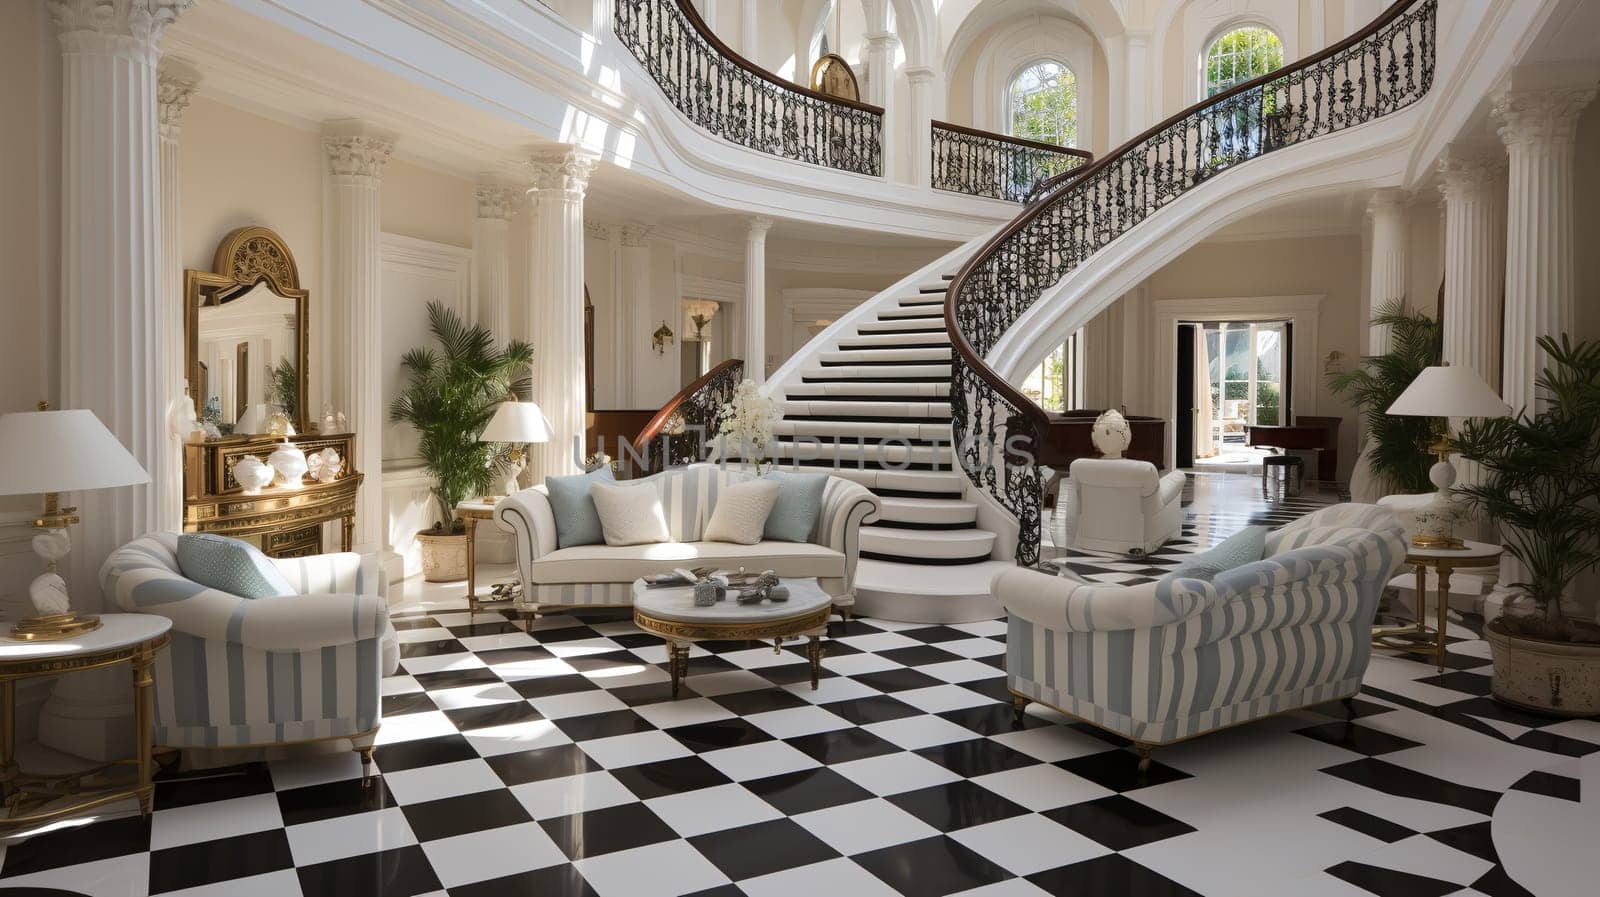 Grand Staircase and Luxurious Decor in Opulent Residential Foyer by chrisroll